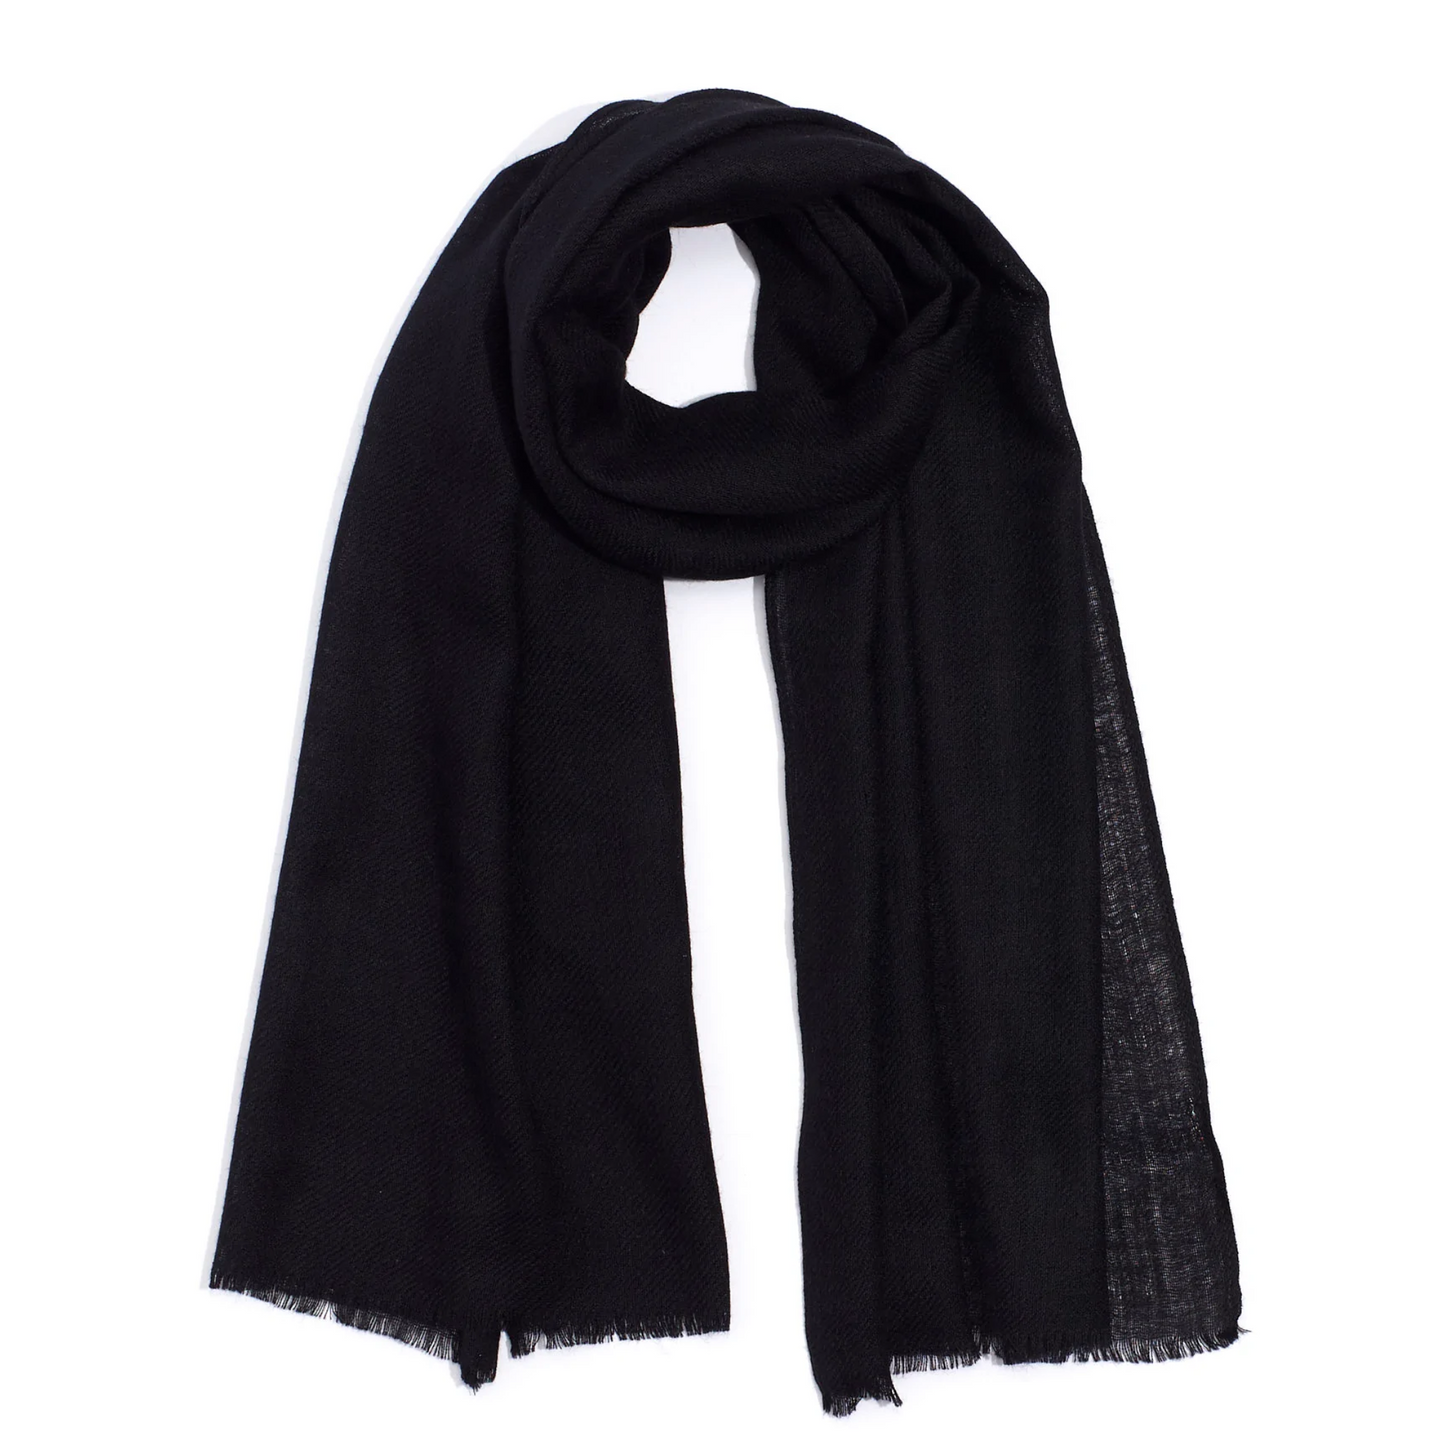 A black scarf is pictured with a loop and has a natural edge at the bottom.